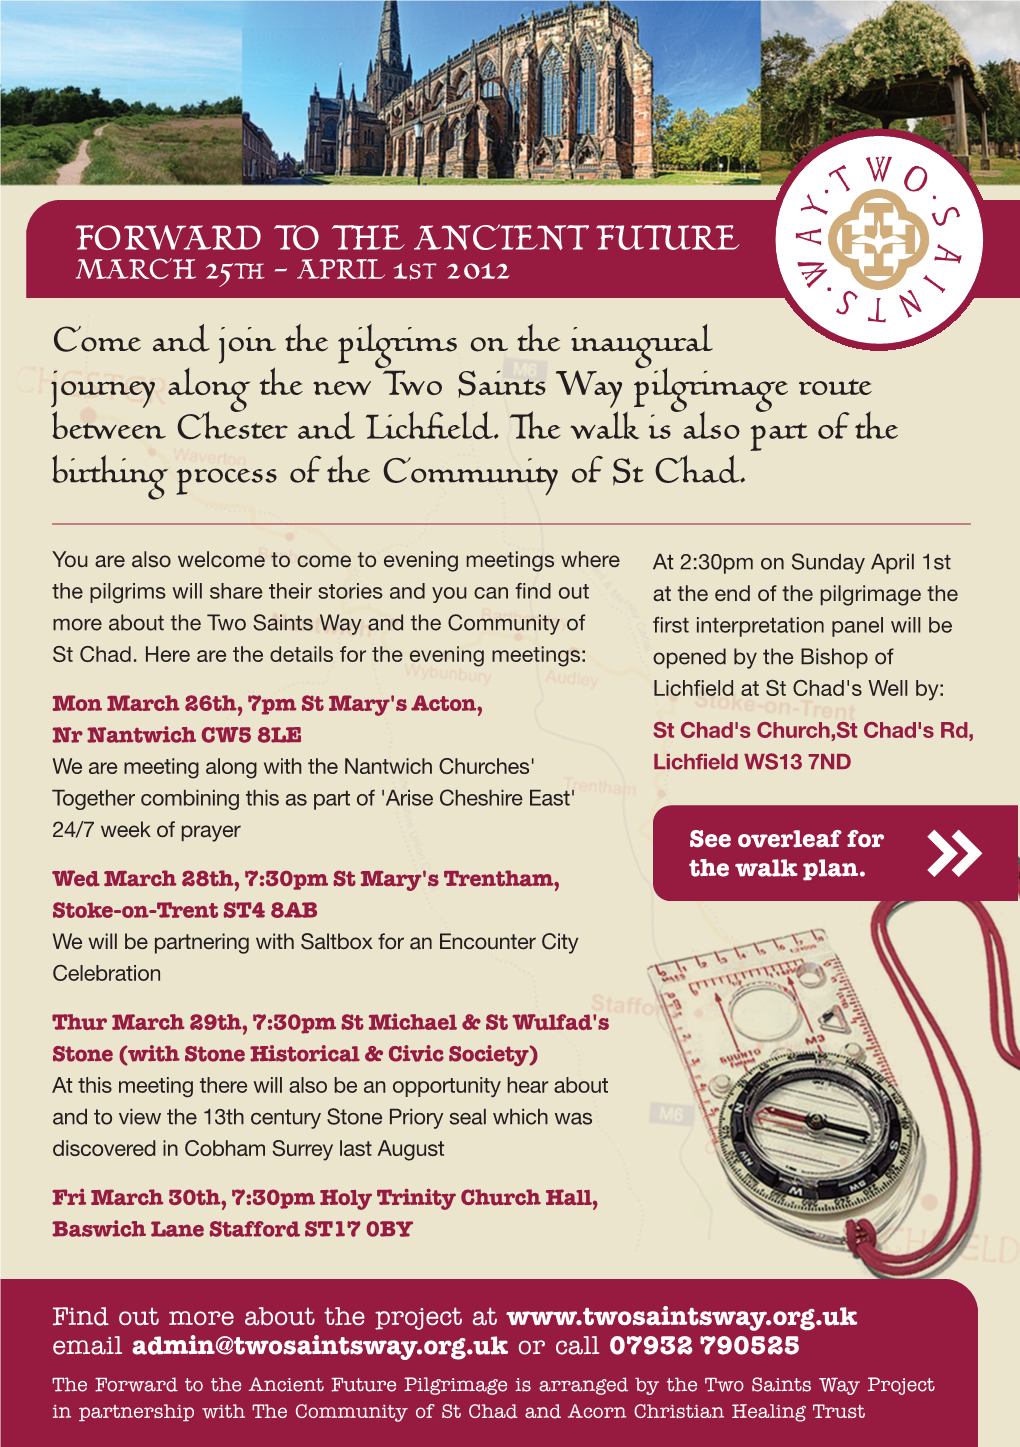 Come and Join the Pilgrims on the Inaugural Journey Along the New Two Saints Way Pilgrimage Route Between Chester and Lichfield